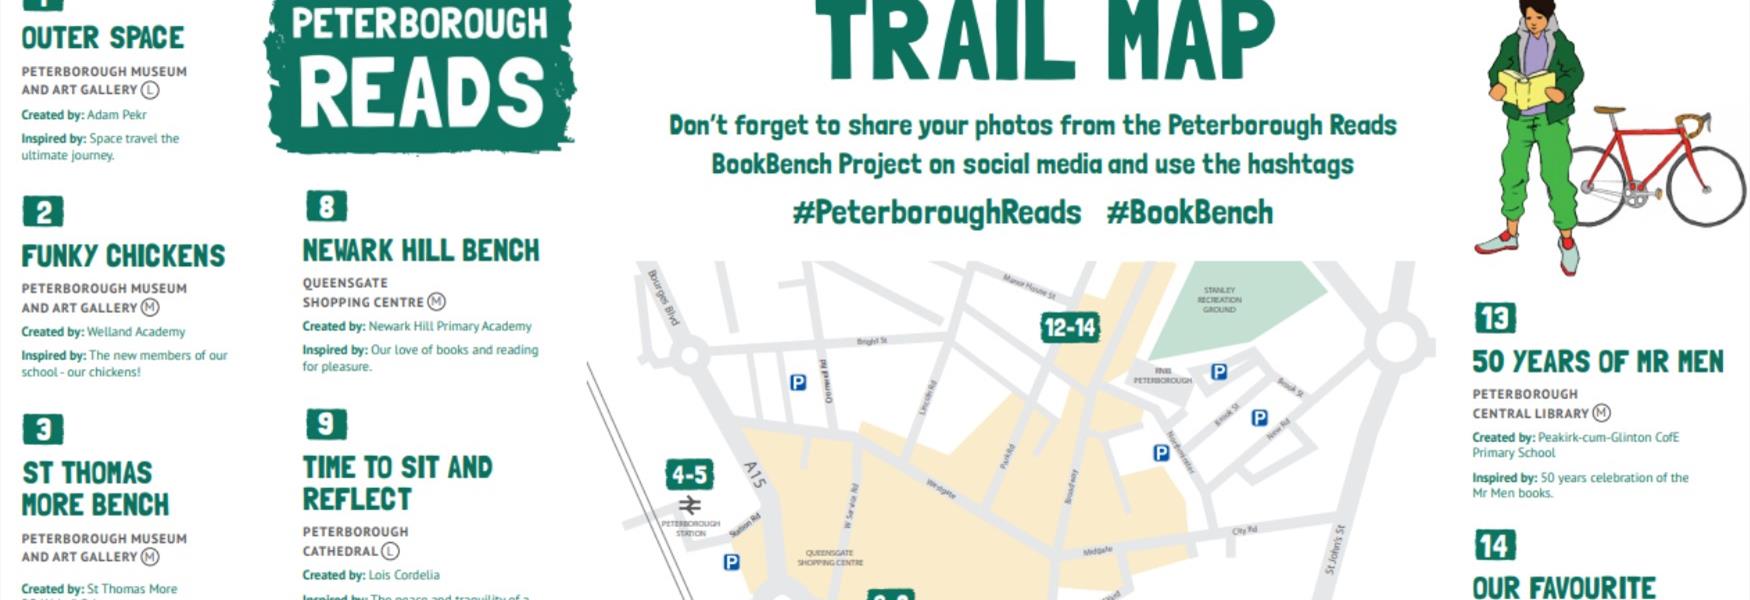 BookBench Trail Map (snippet)